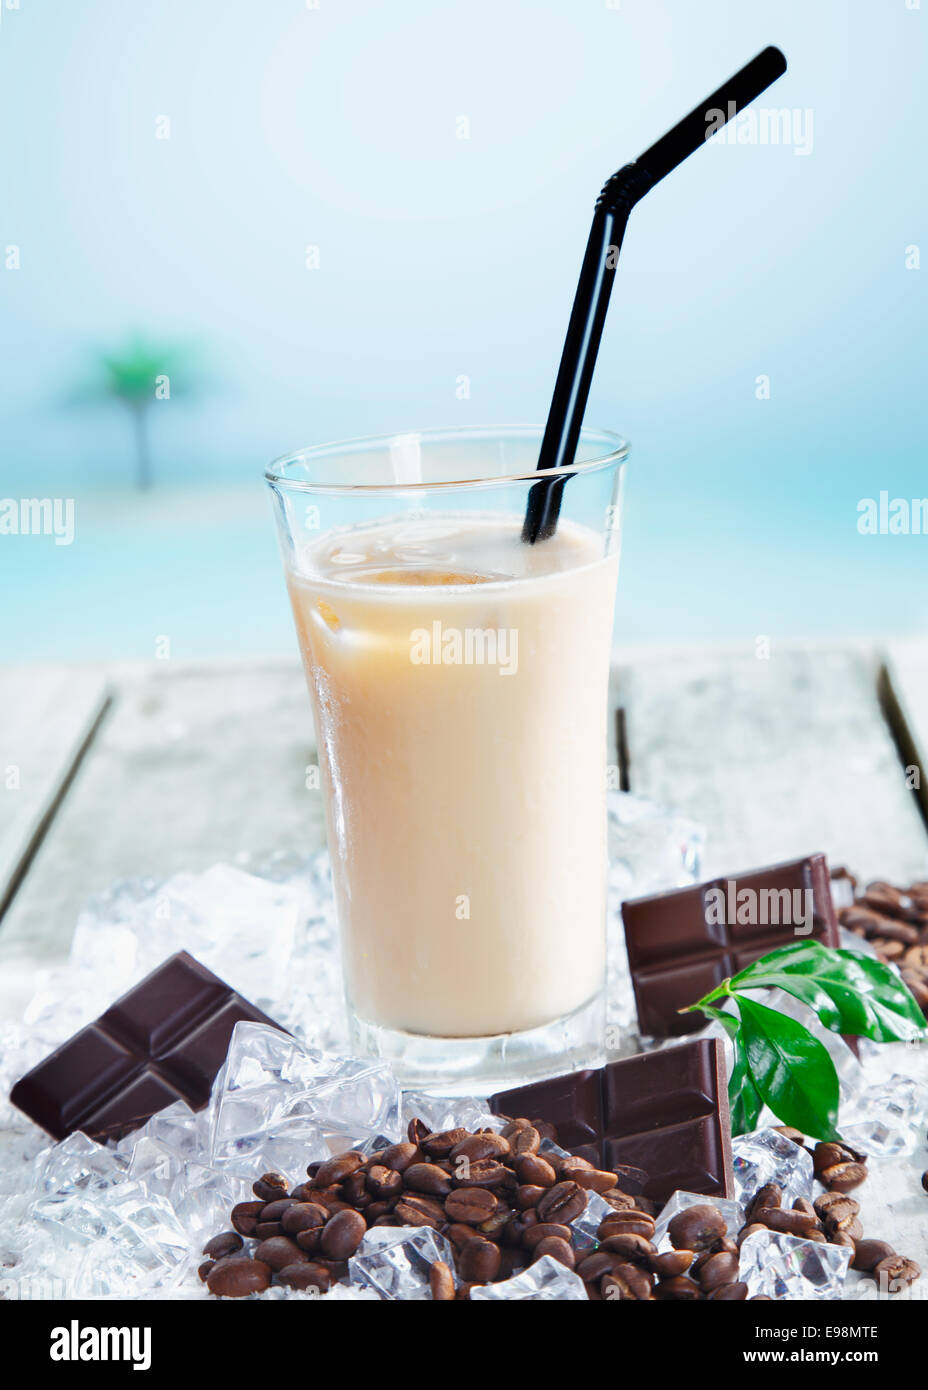 Chilled cafe mocha on ice enjoyed through a straw for a refreshing drink Stock Photo